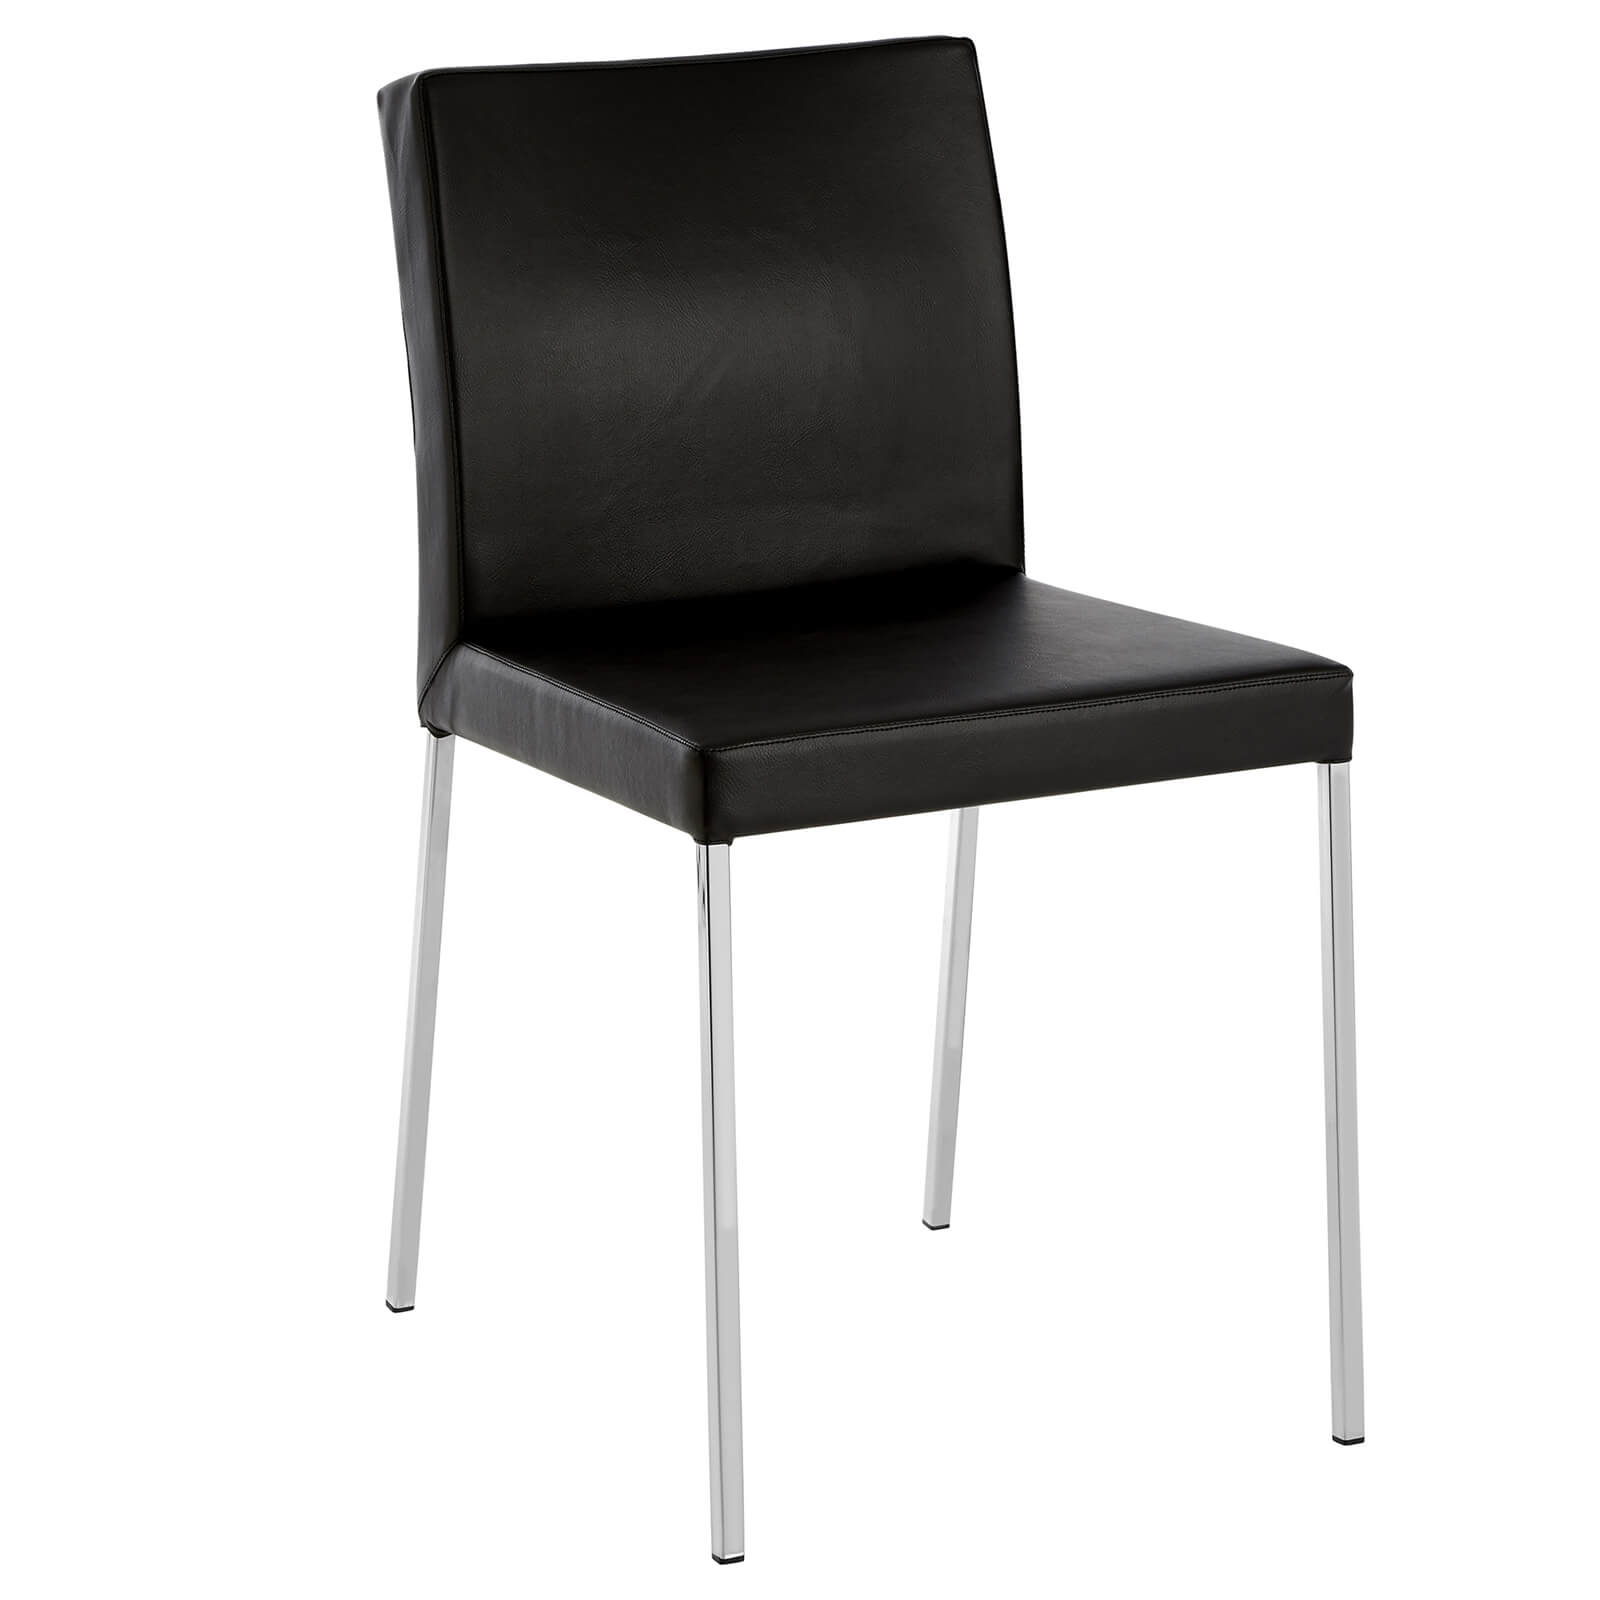 Lago Dining Chairs - Set of 2 - Black